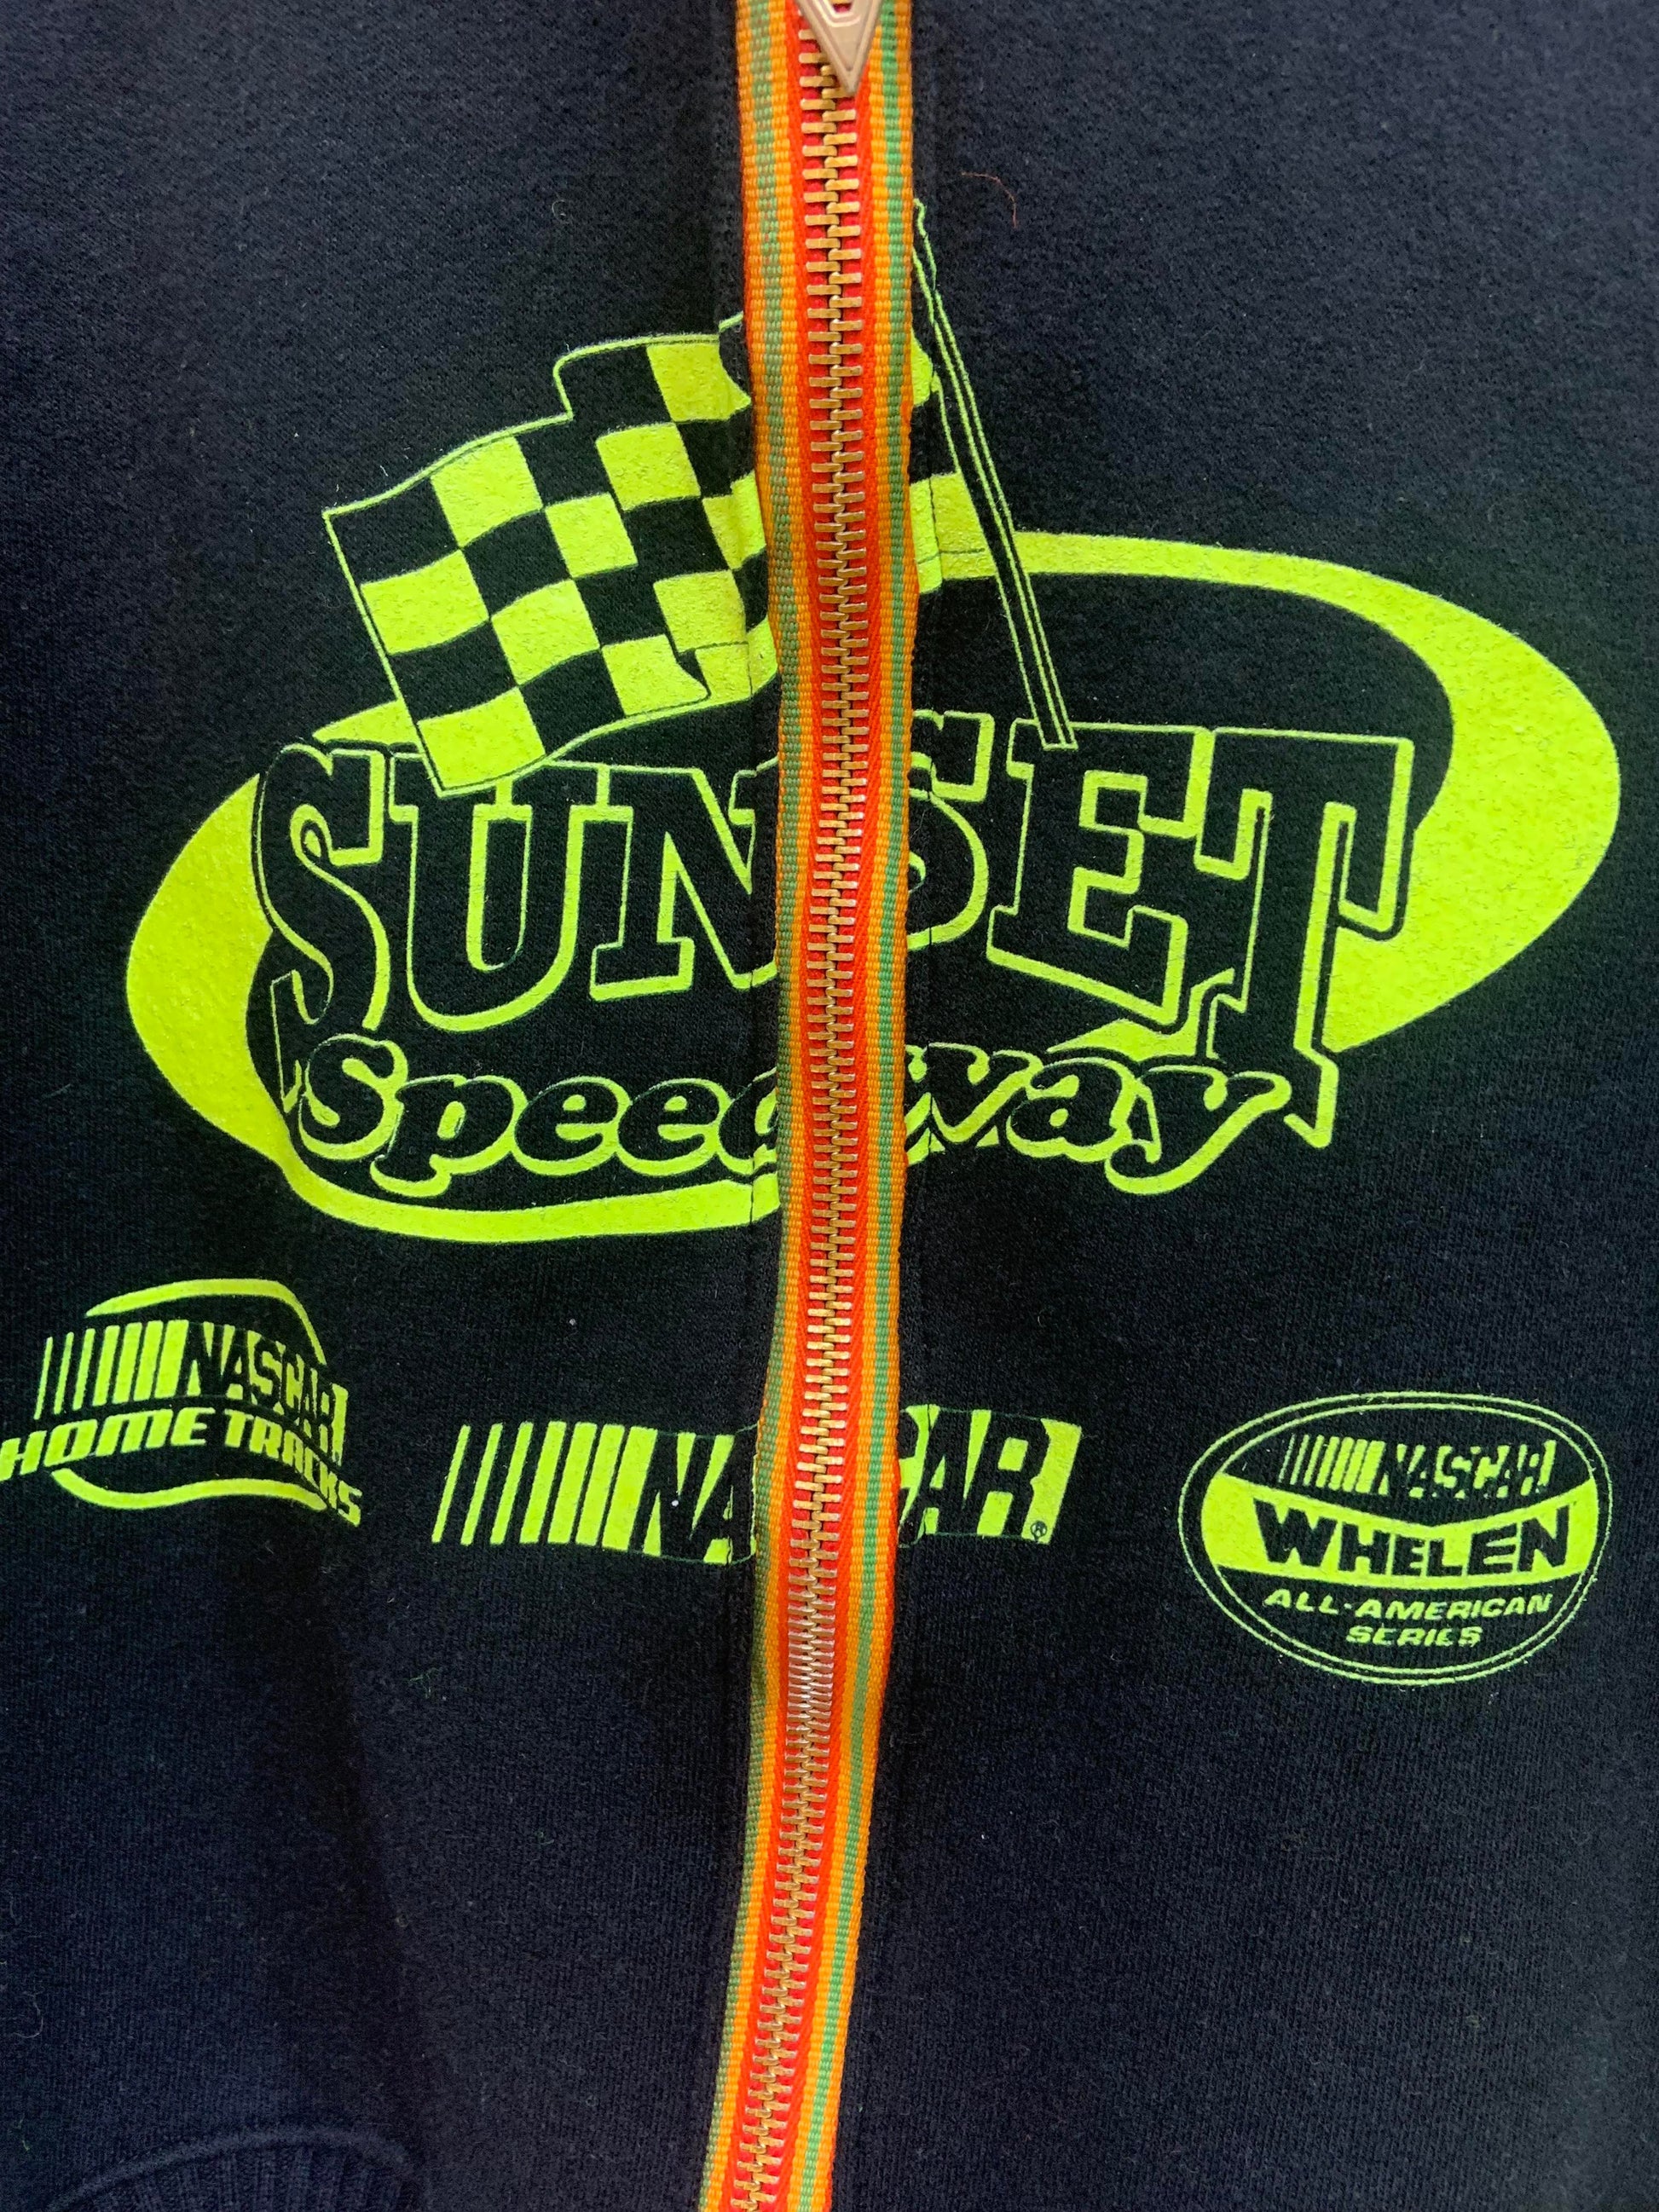 Revamped Clothing Toronto - Repurposed Upcycled Alterations Repairs Parkdale nascar high vis crop